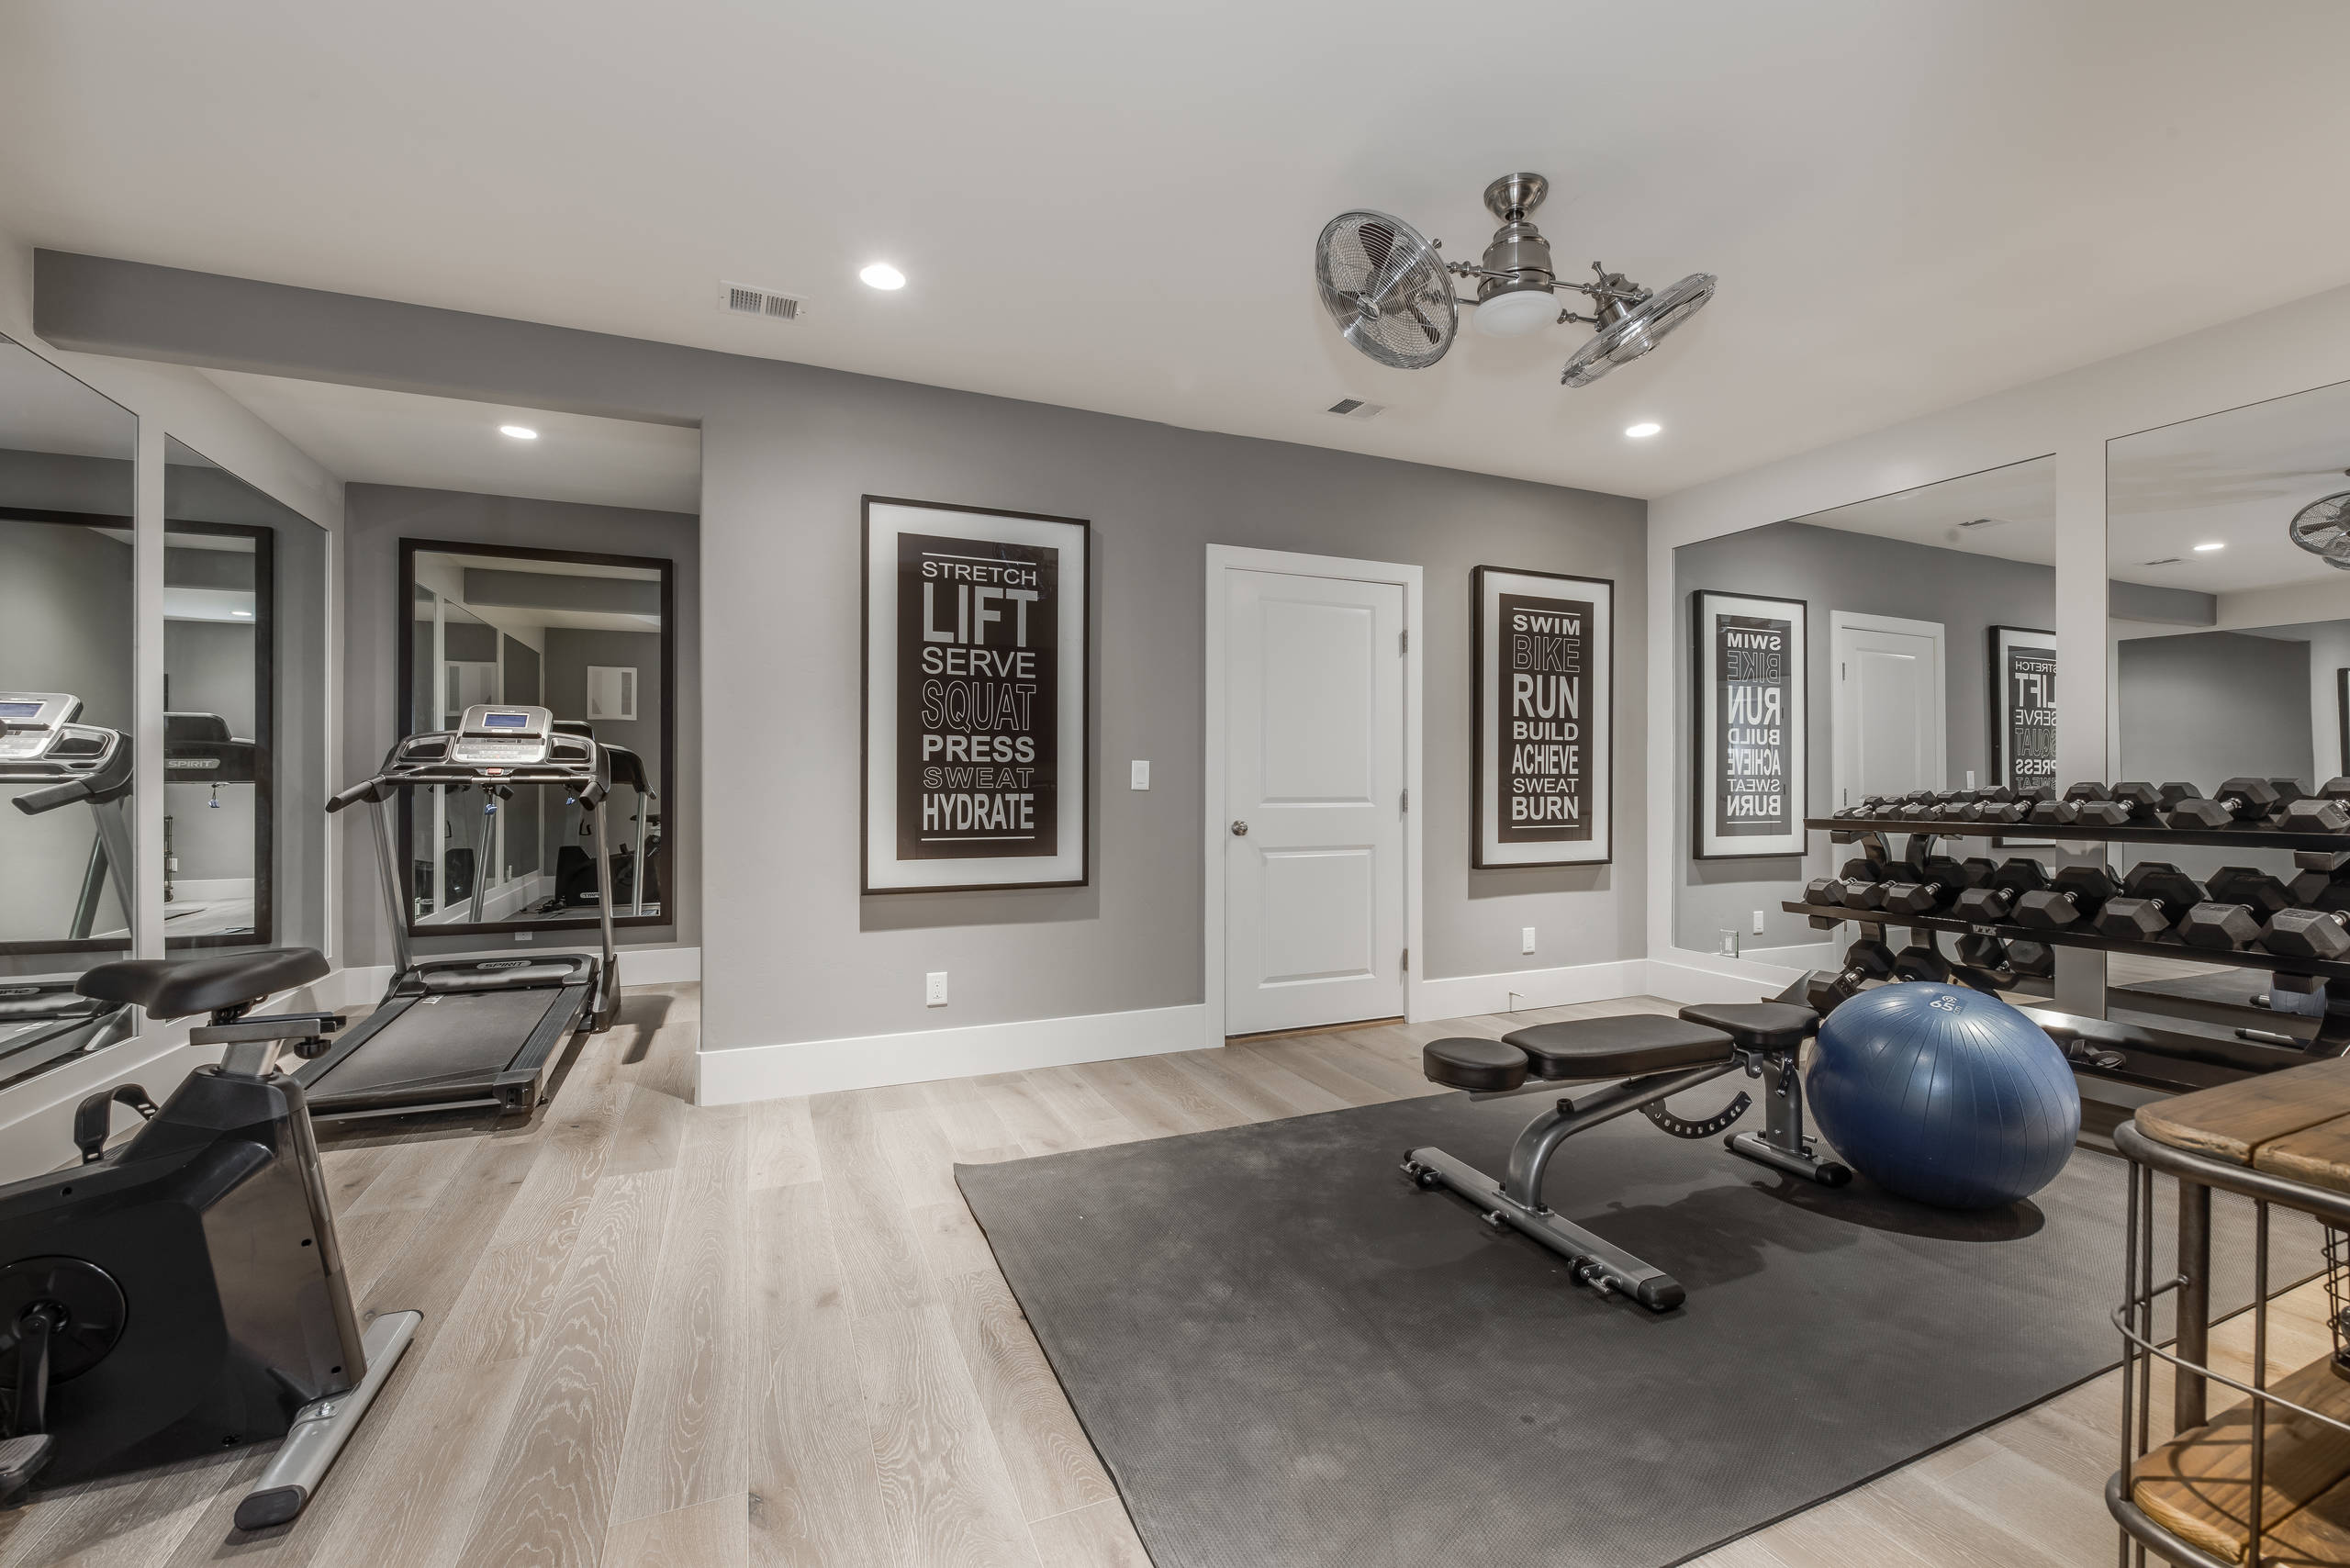 20+ Outstanding Home Gym Room Design Ideas For Inspiration